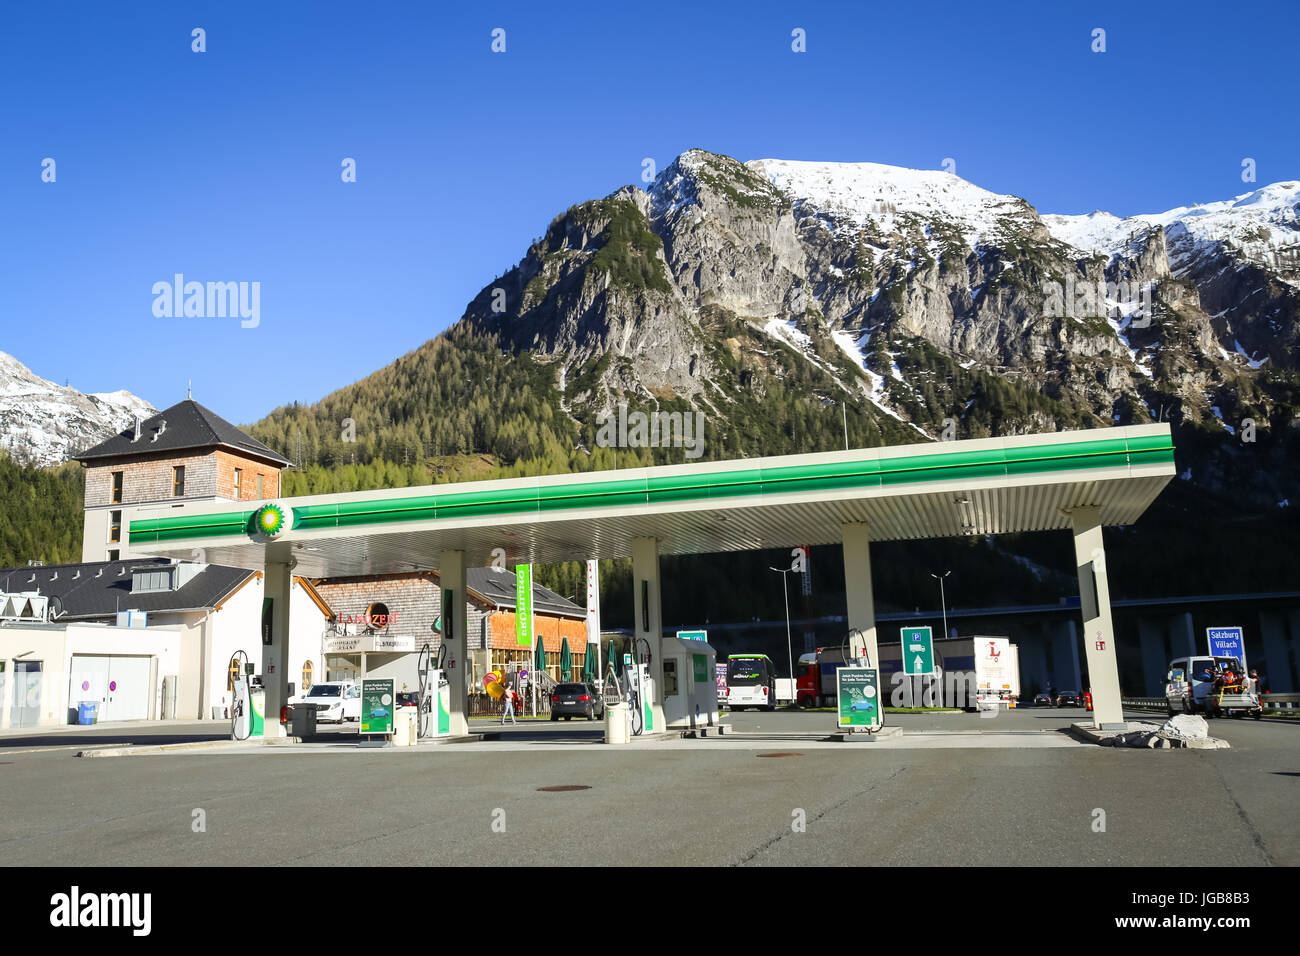 FLACHAU, AUSTRIA - MAY 10, 2017 : The highway rest stop with a BP gas station and the Landzeit Tauernalm hotel and restaurant in Alps environment in F Stock Photo